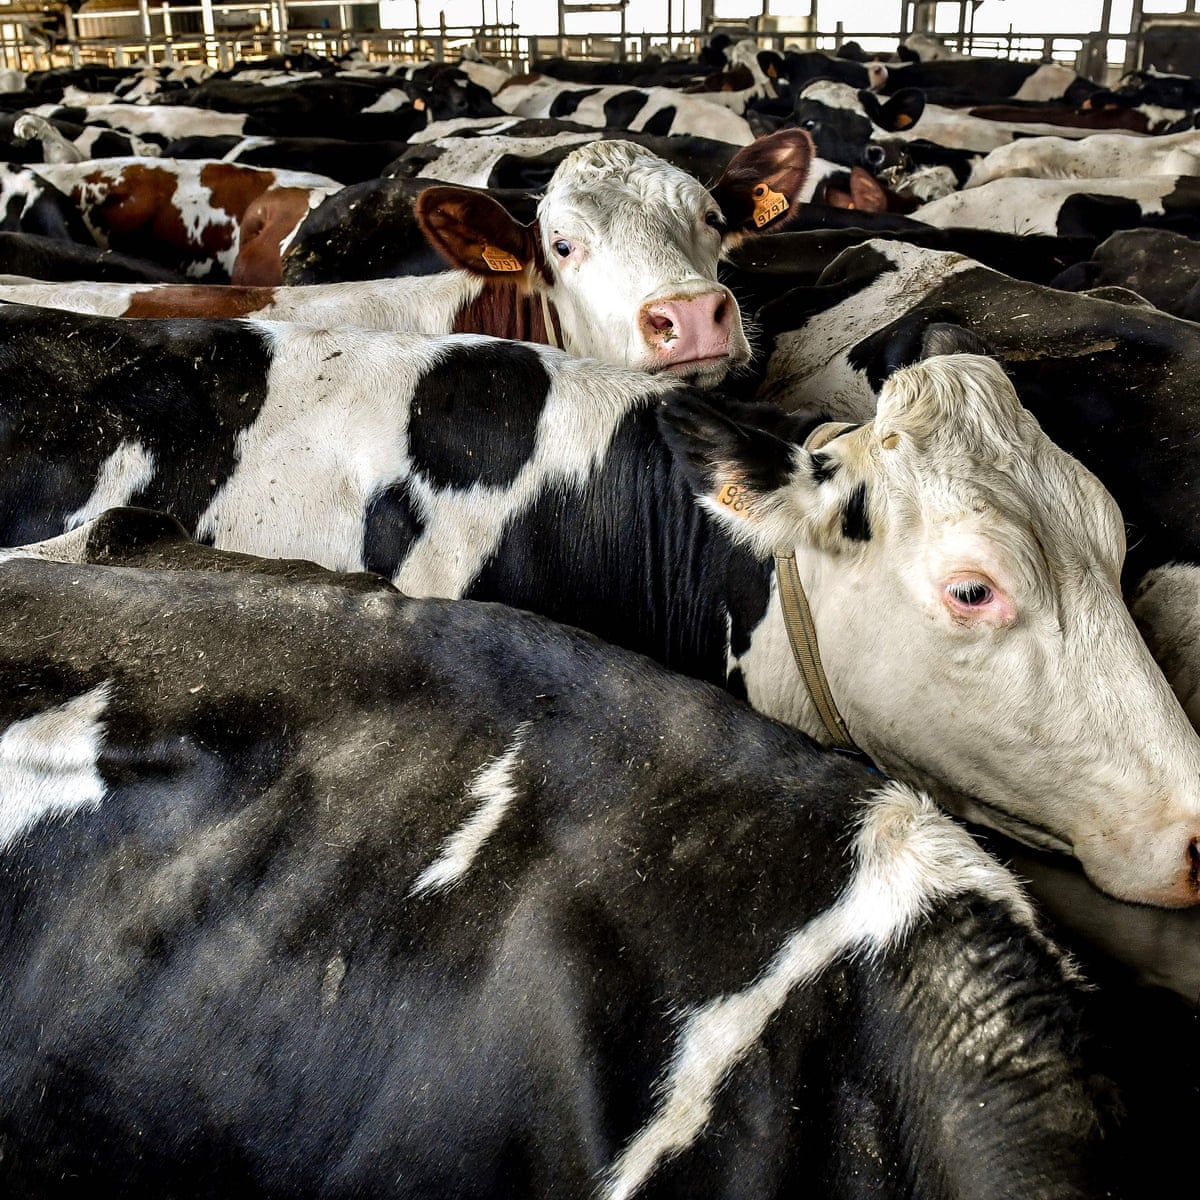 Abuse of animals rife on farms across Europe, auditors warn | Farm animals  | The Guardian